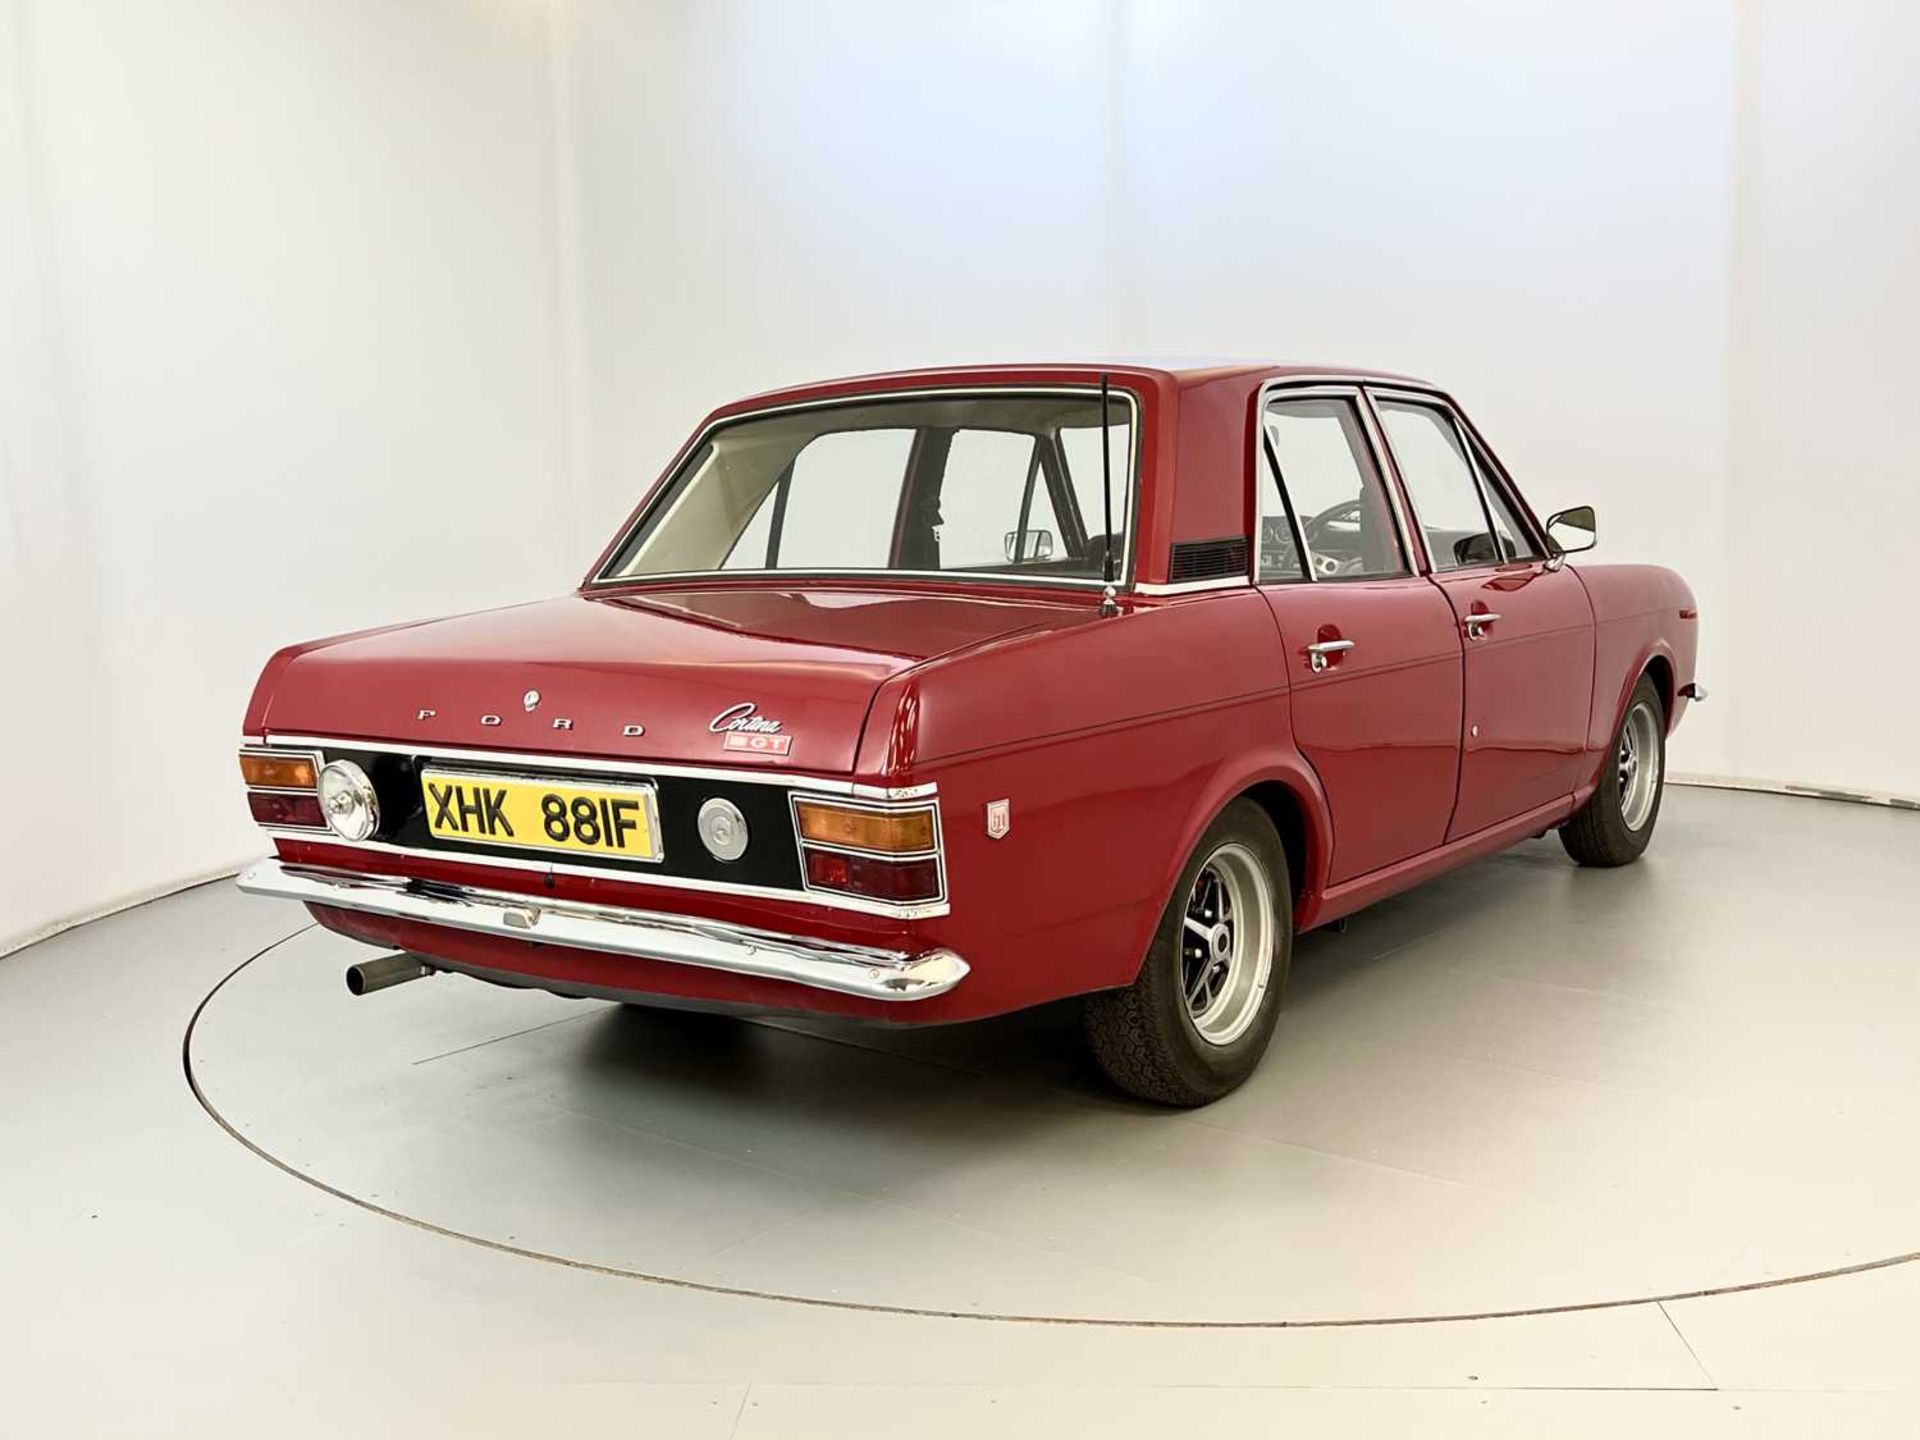 1967 Ford Cortina 1600GT - Image 9 of 37